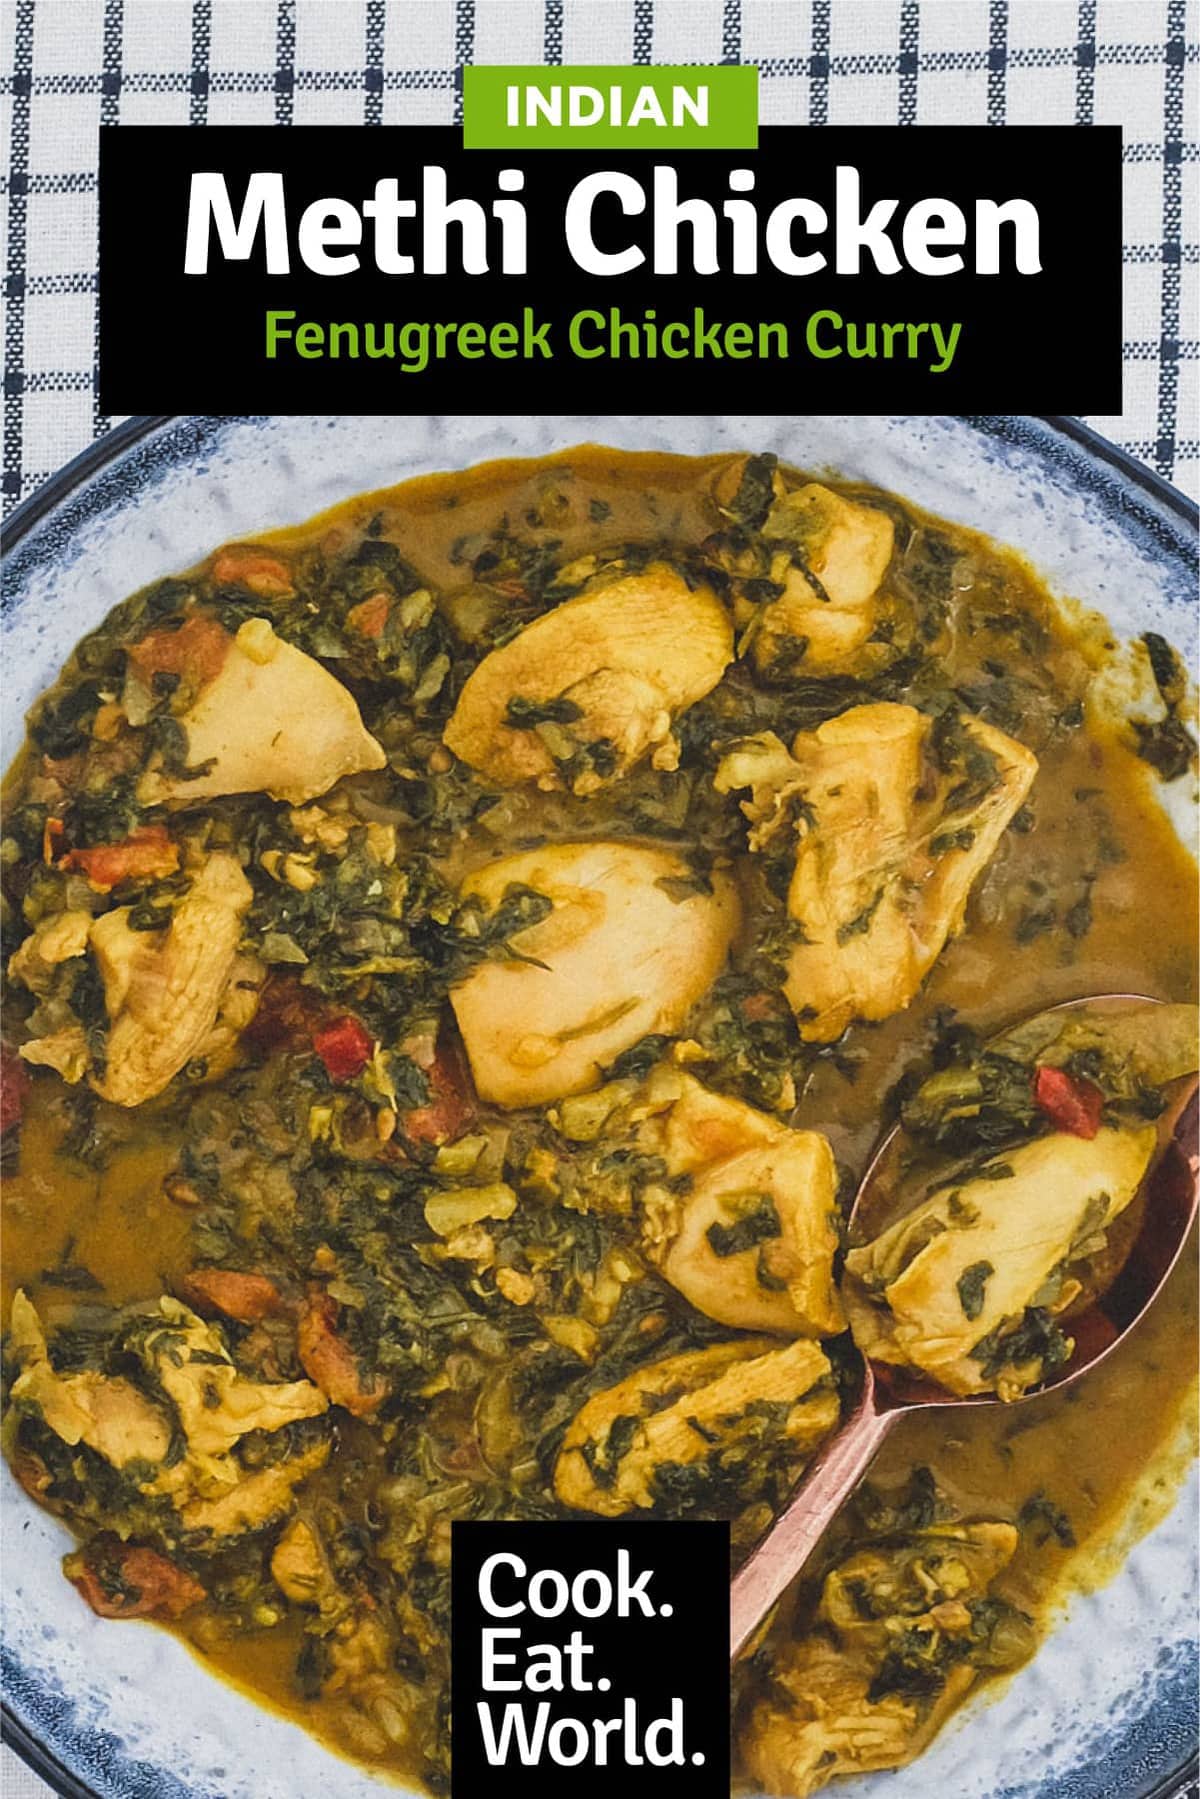 A bowl of chicken curry cooked with fenugreek leaves with a serving spoon